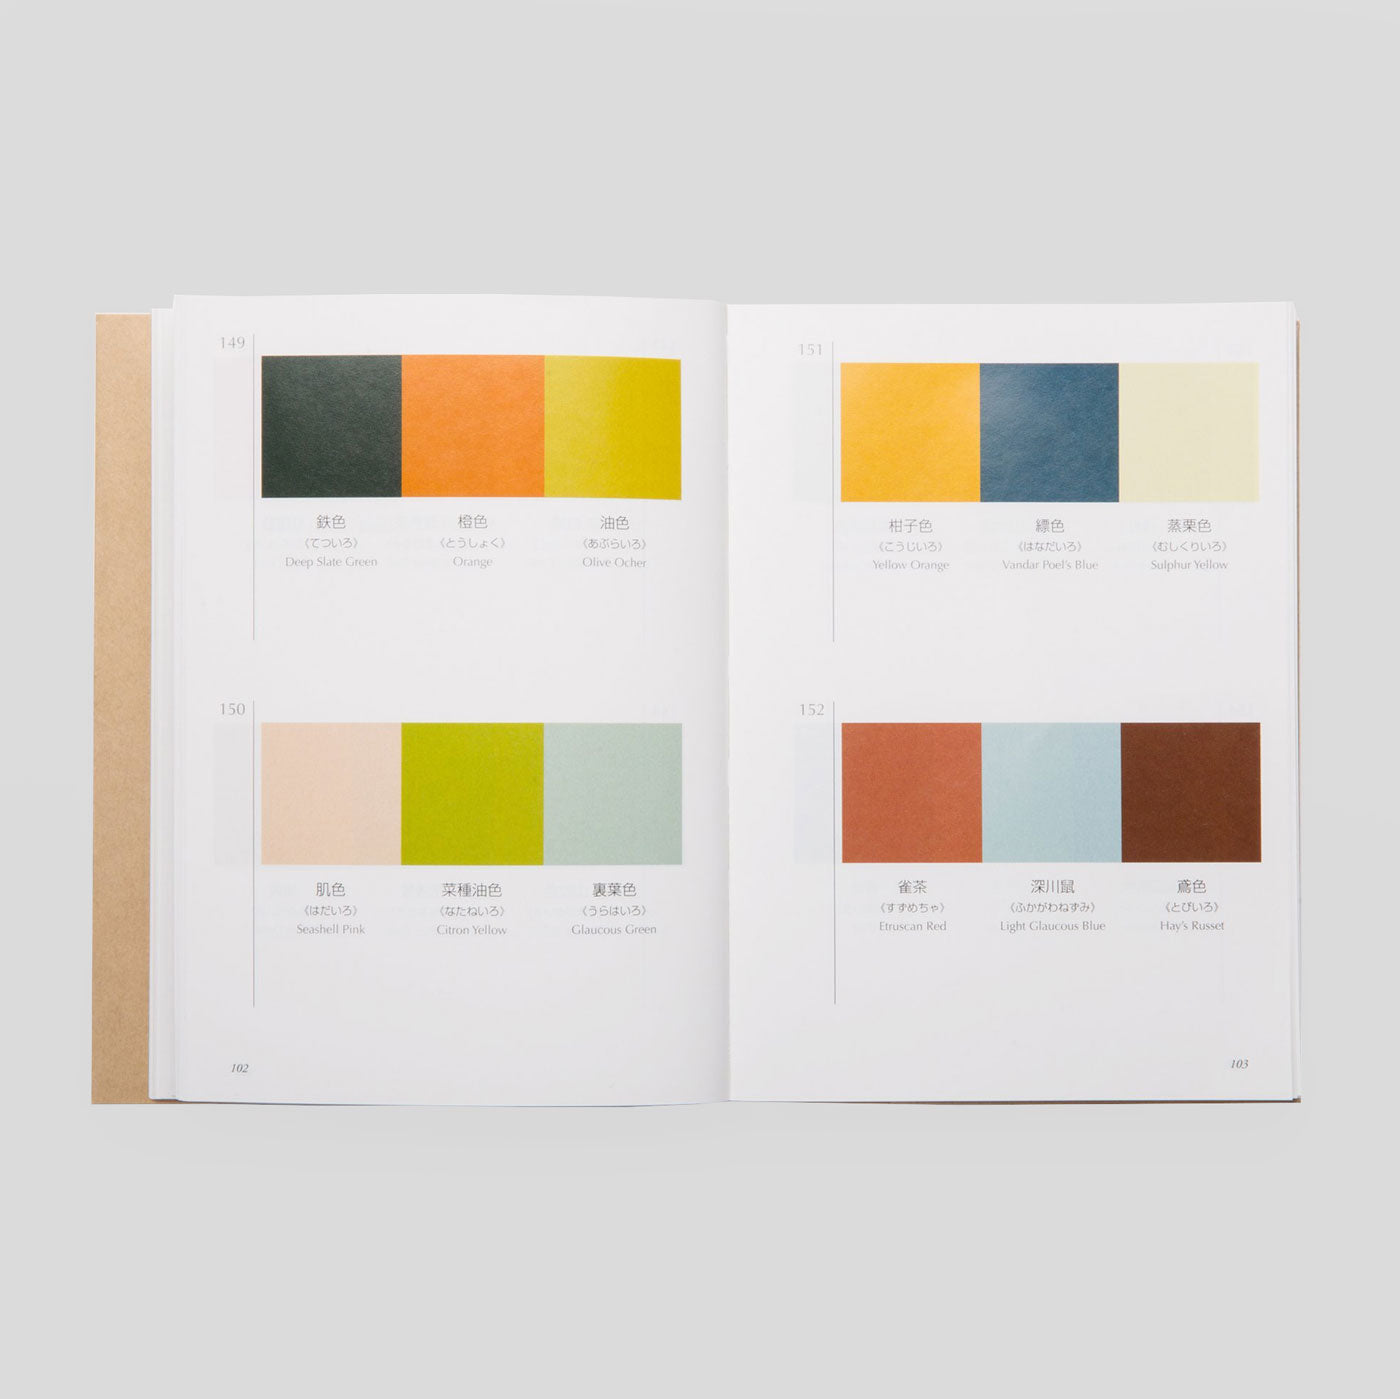 A Dictionary of Colour Combinations by Sanzo Wada - Seigensha